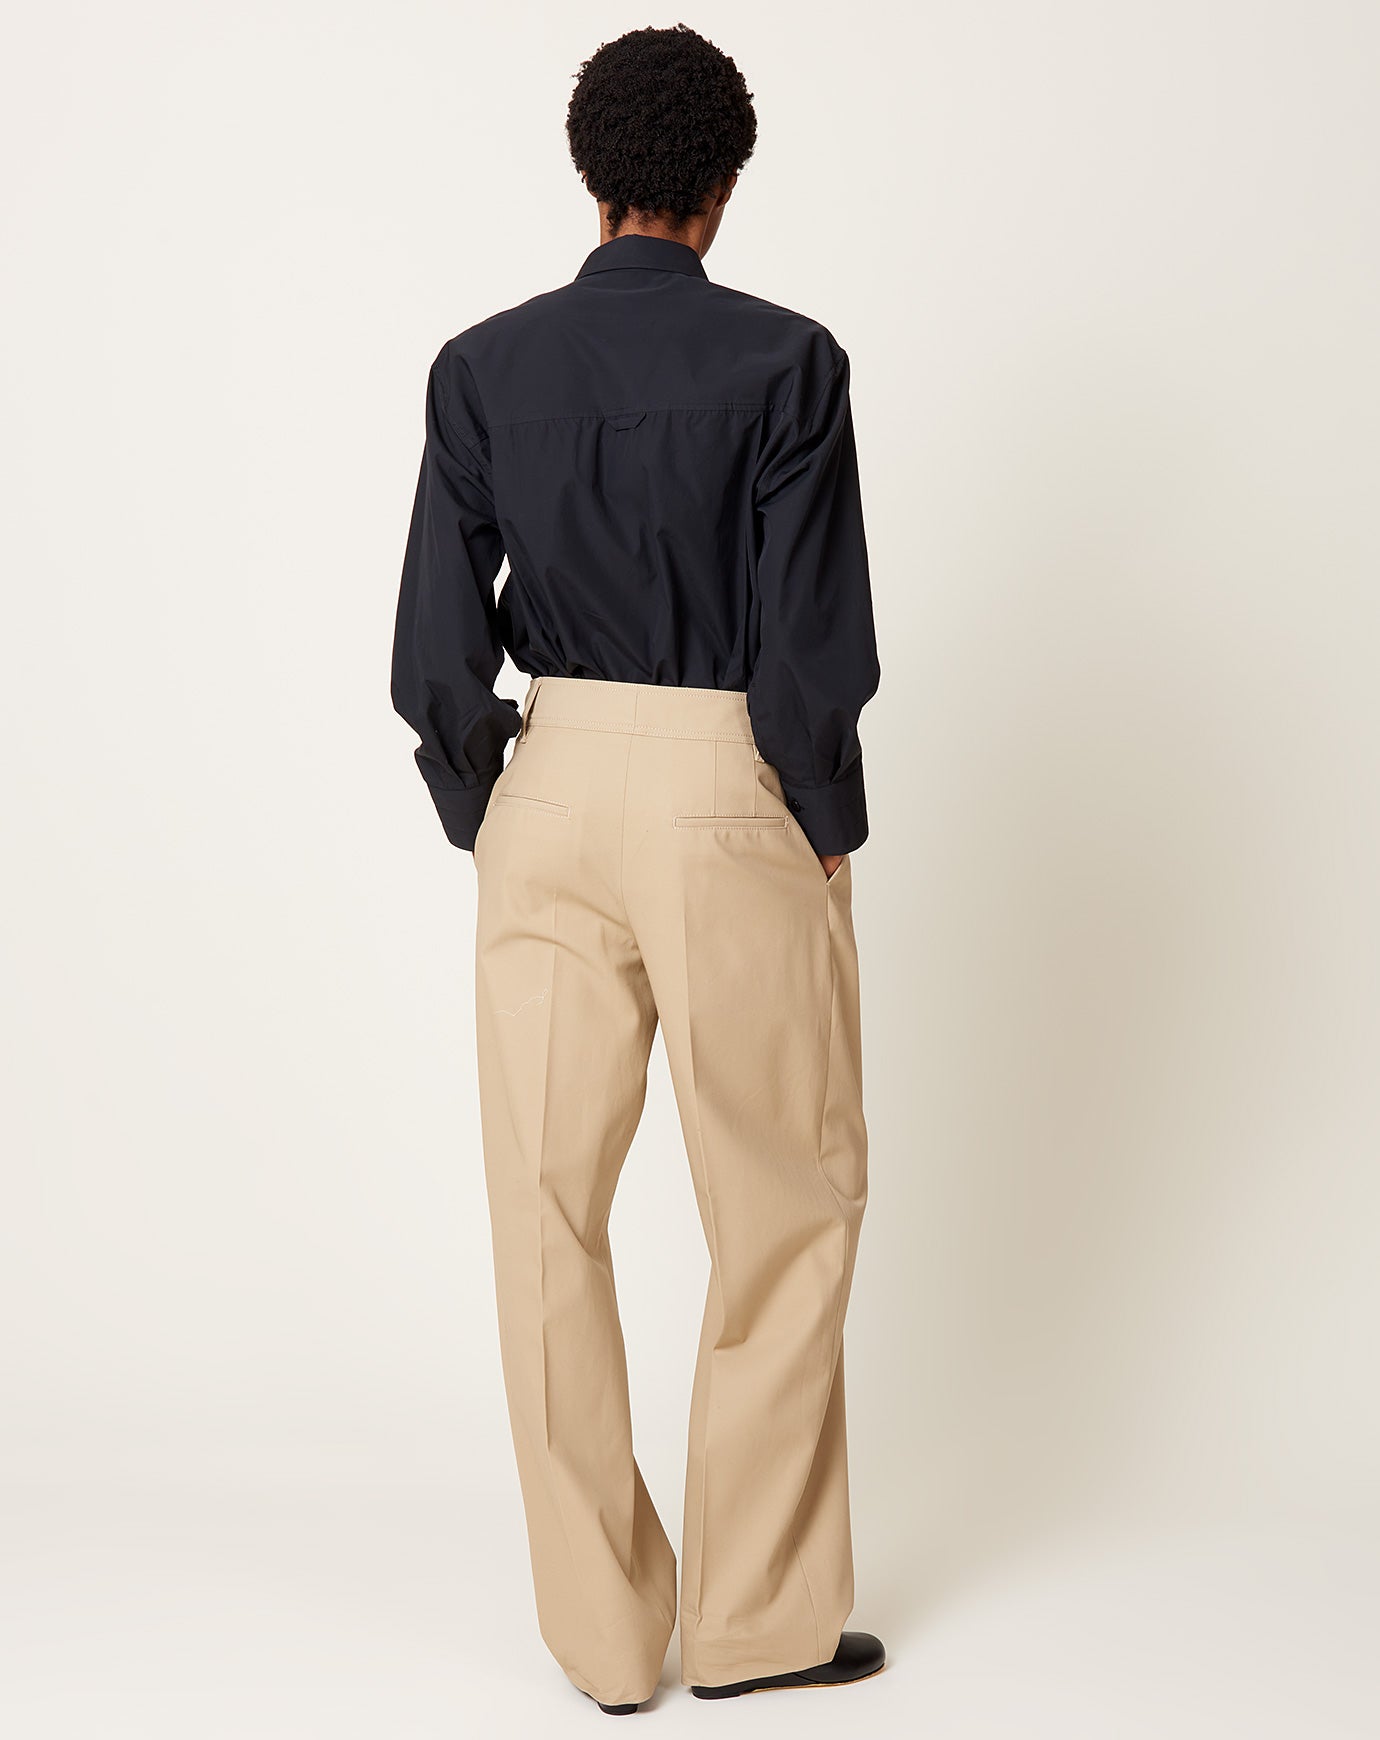 19 Best Pleated Pants for Men - Stylish Trousers with Pleats